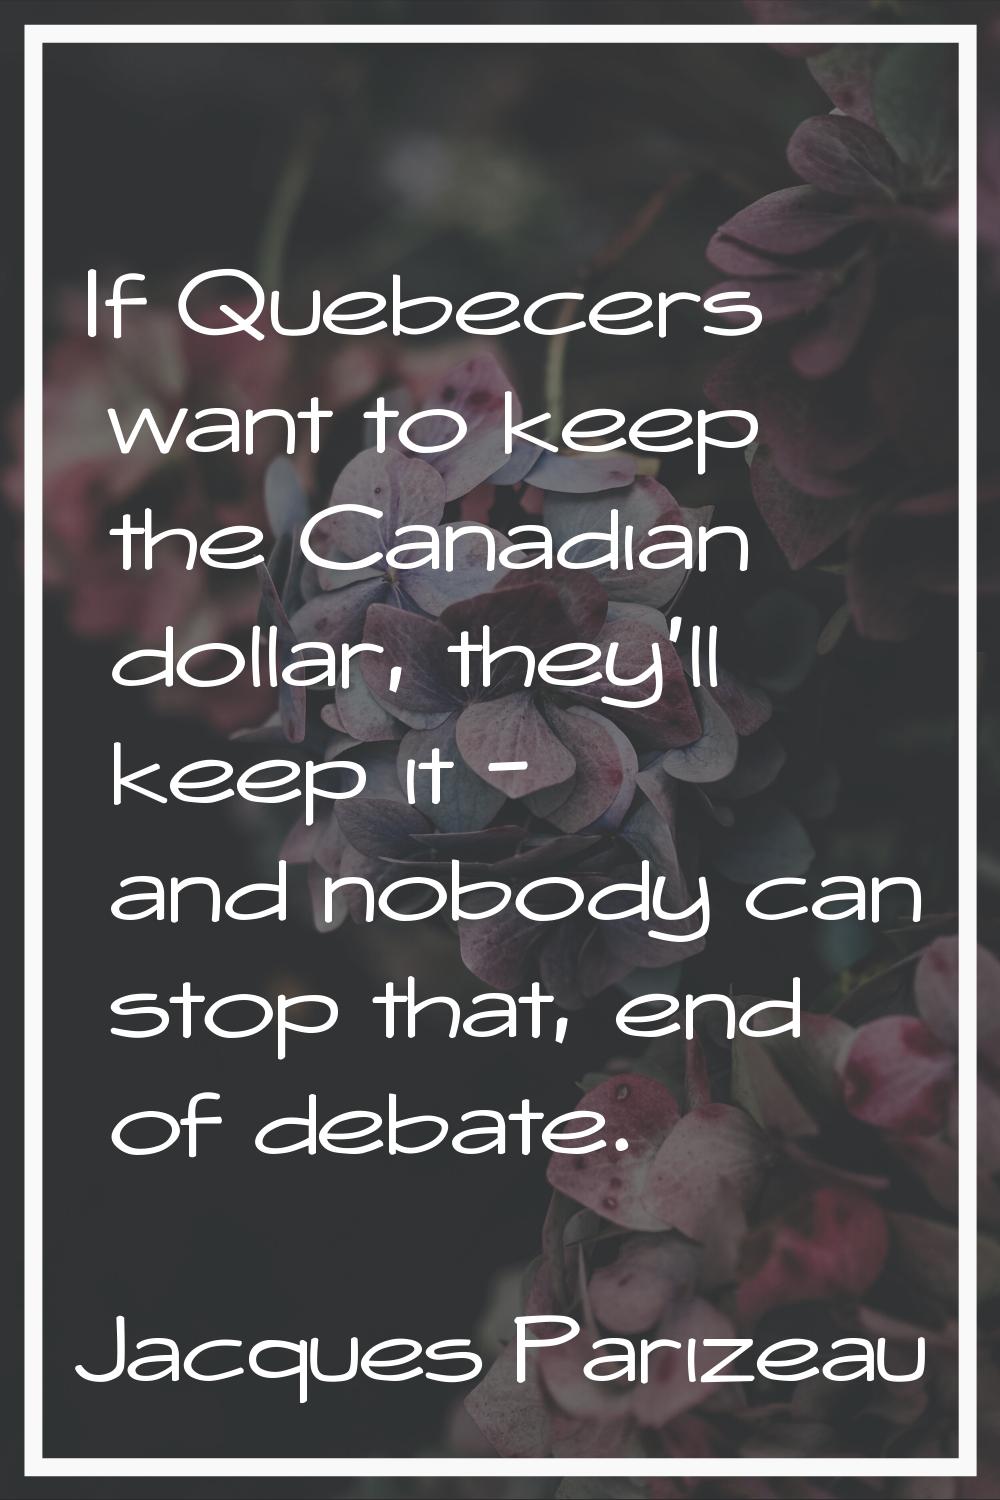 If Quebecers want to keep the Canadian dollar, they'll keep it - and nobody can stop that, end of d